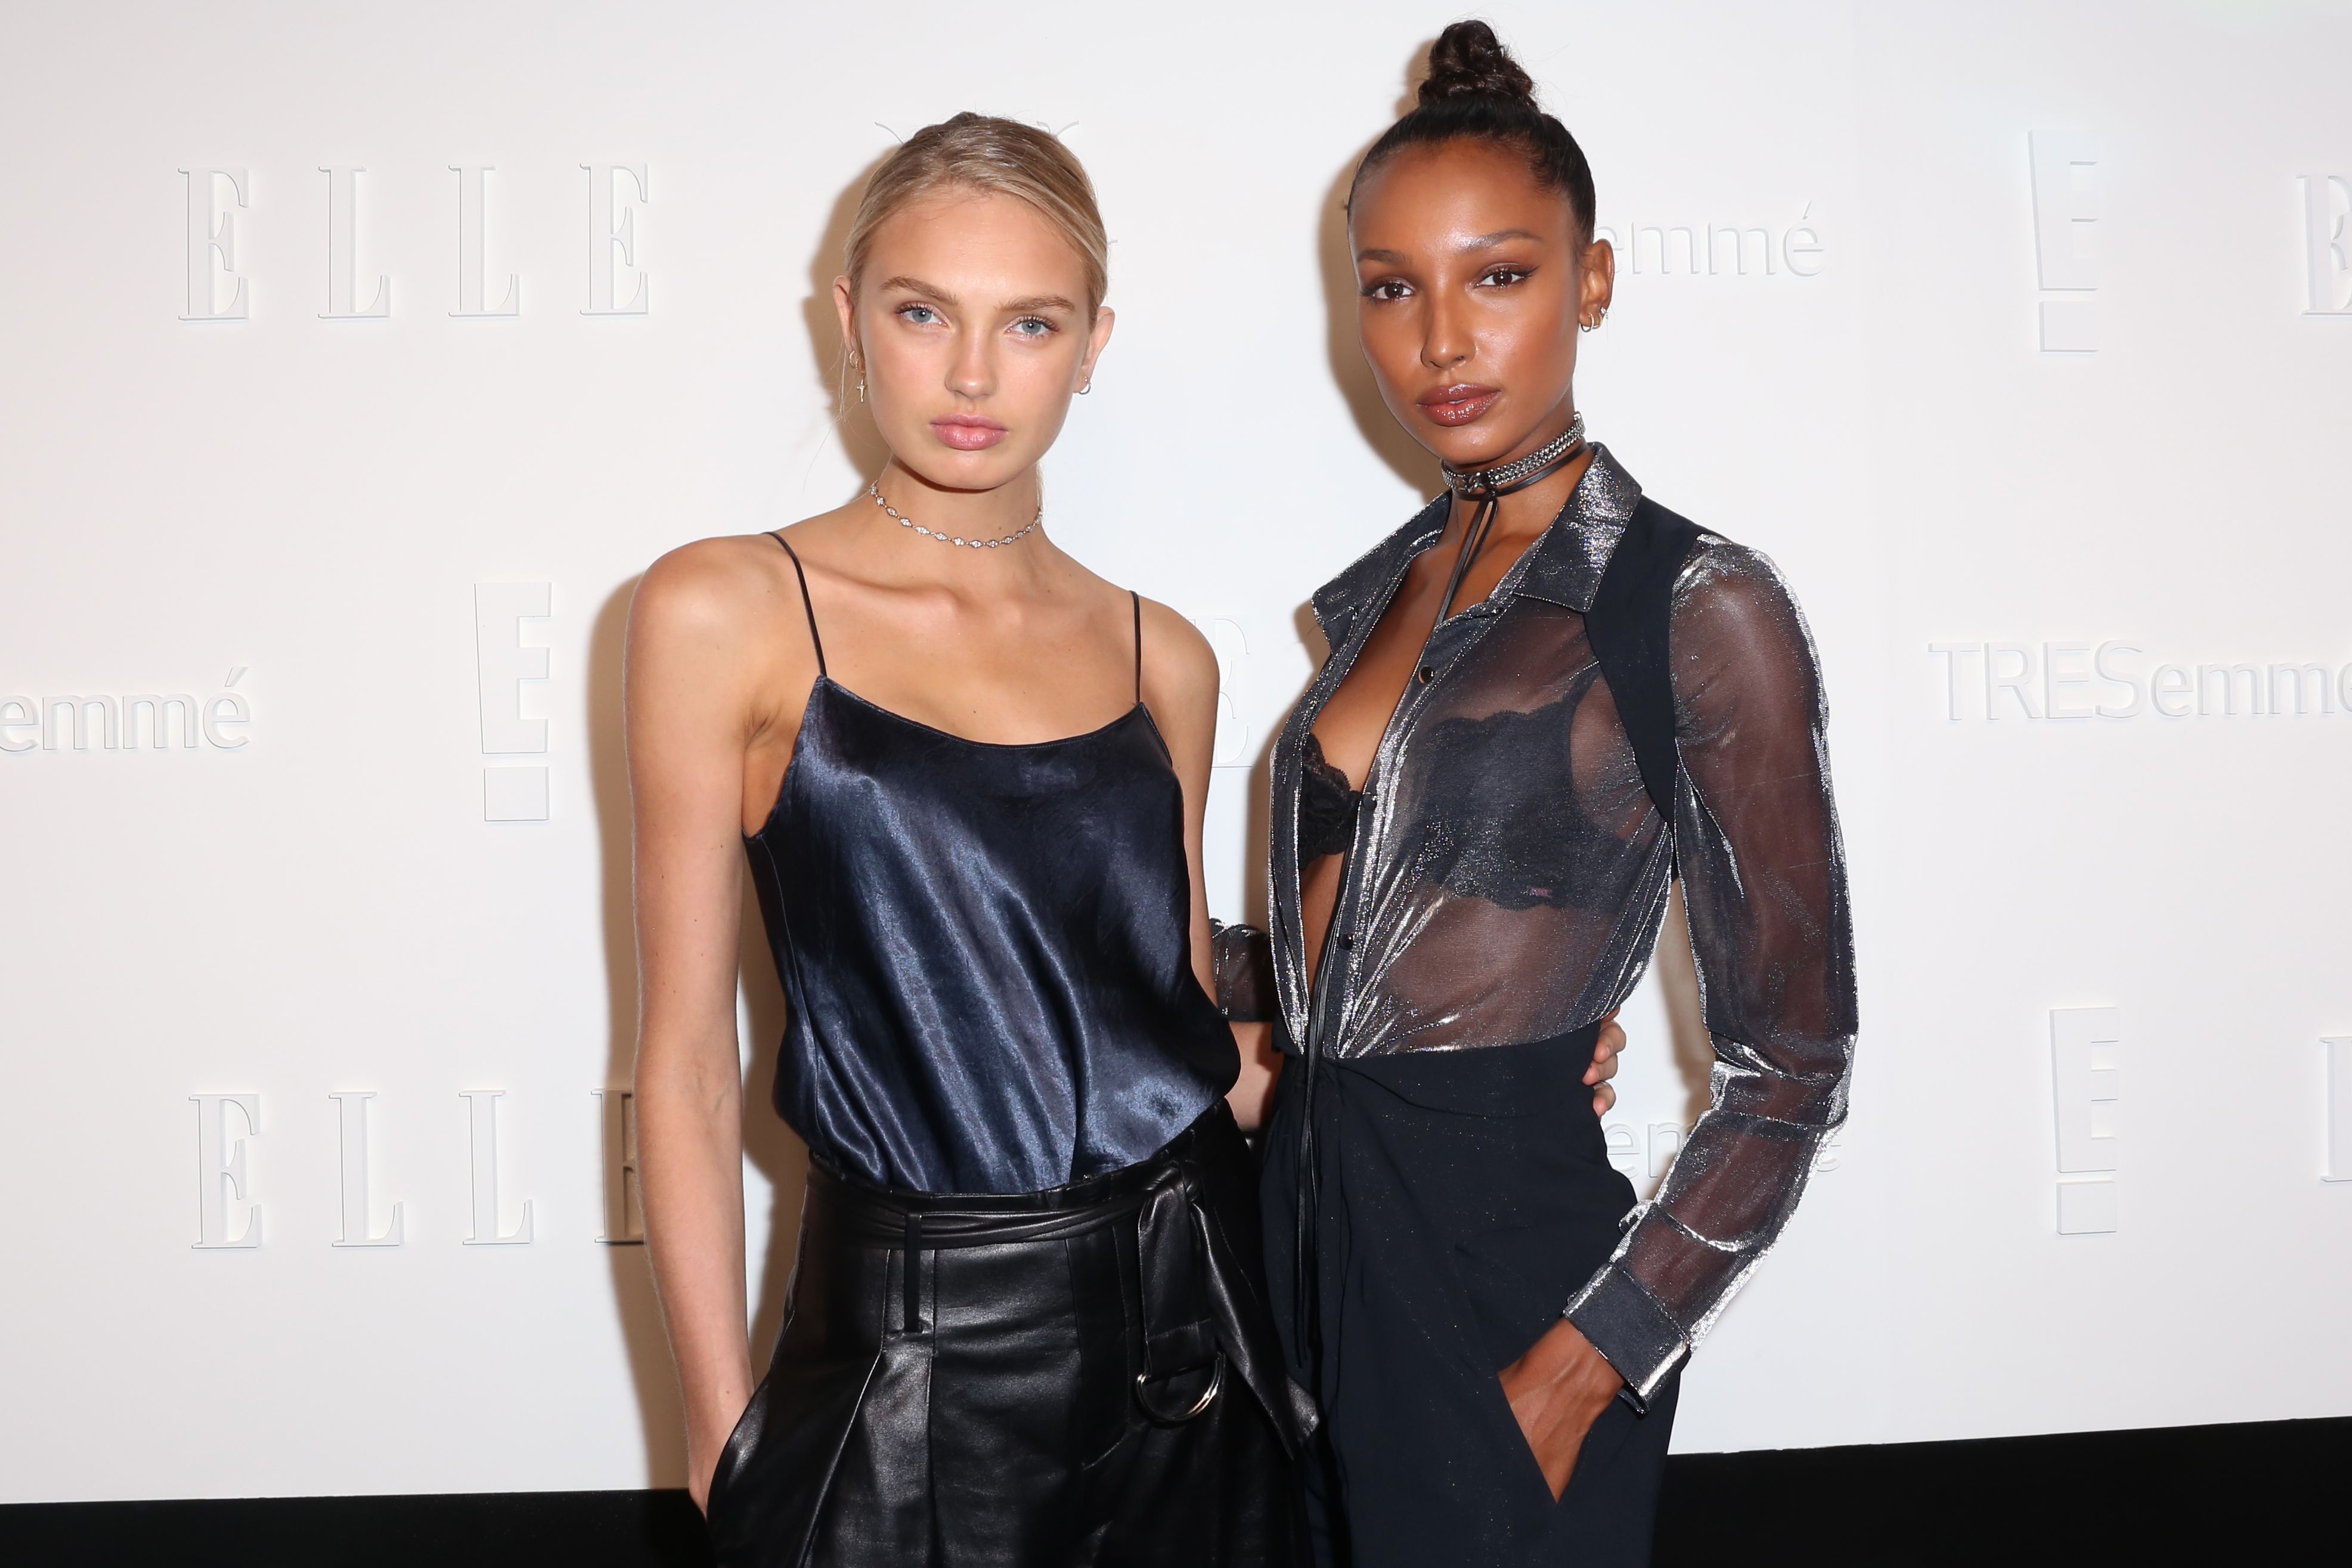 Romee Strijd attends Elle IMG party